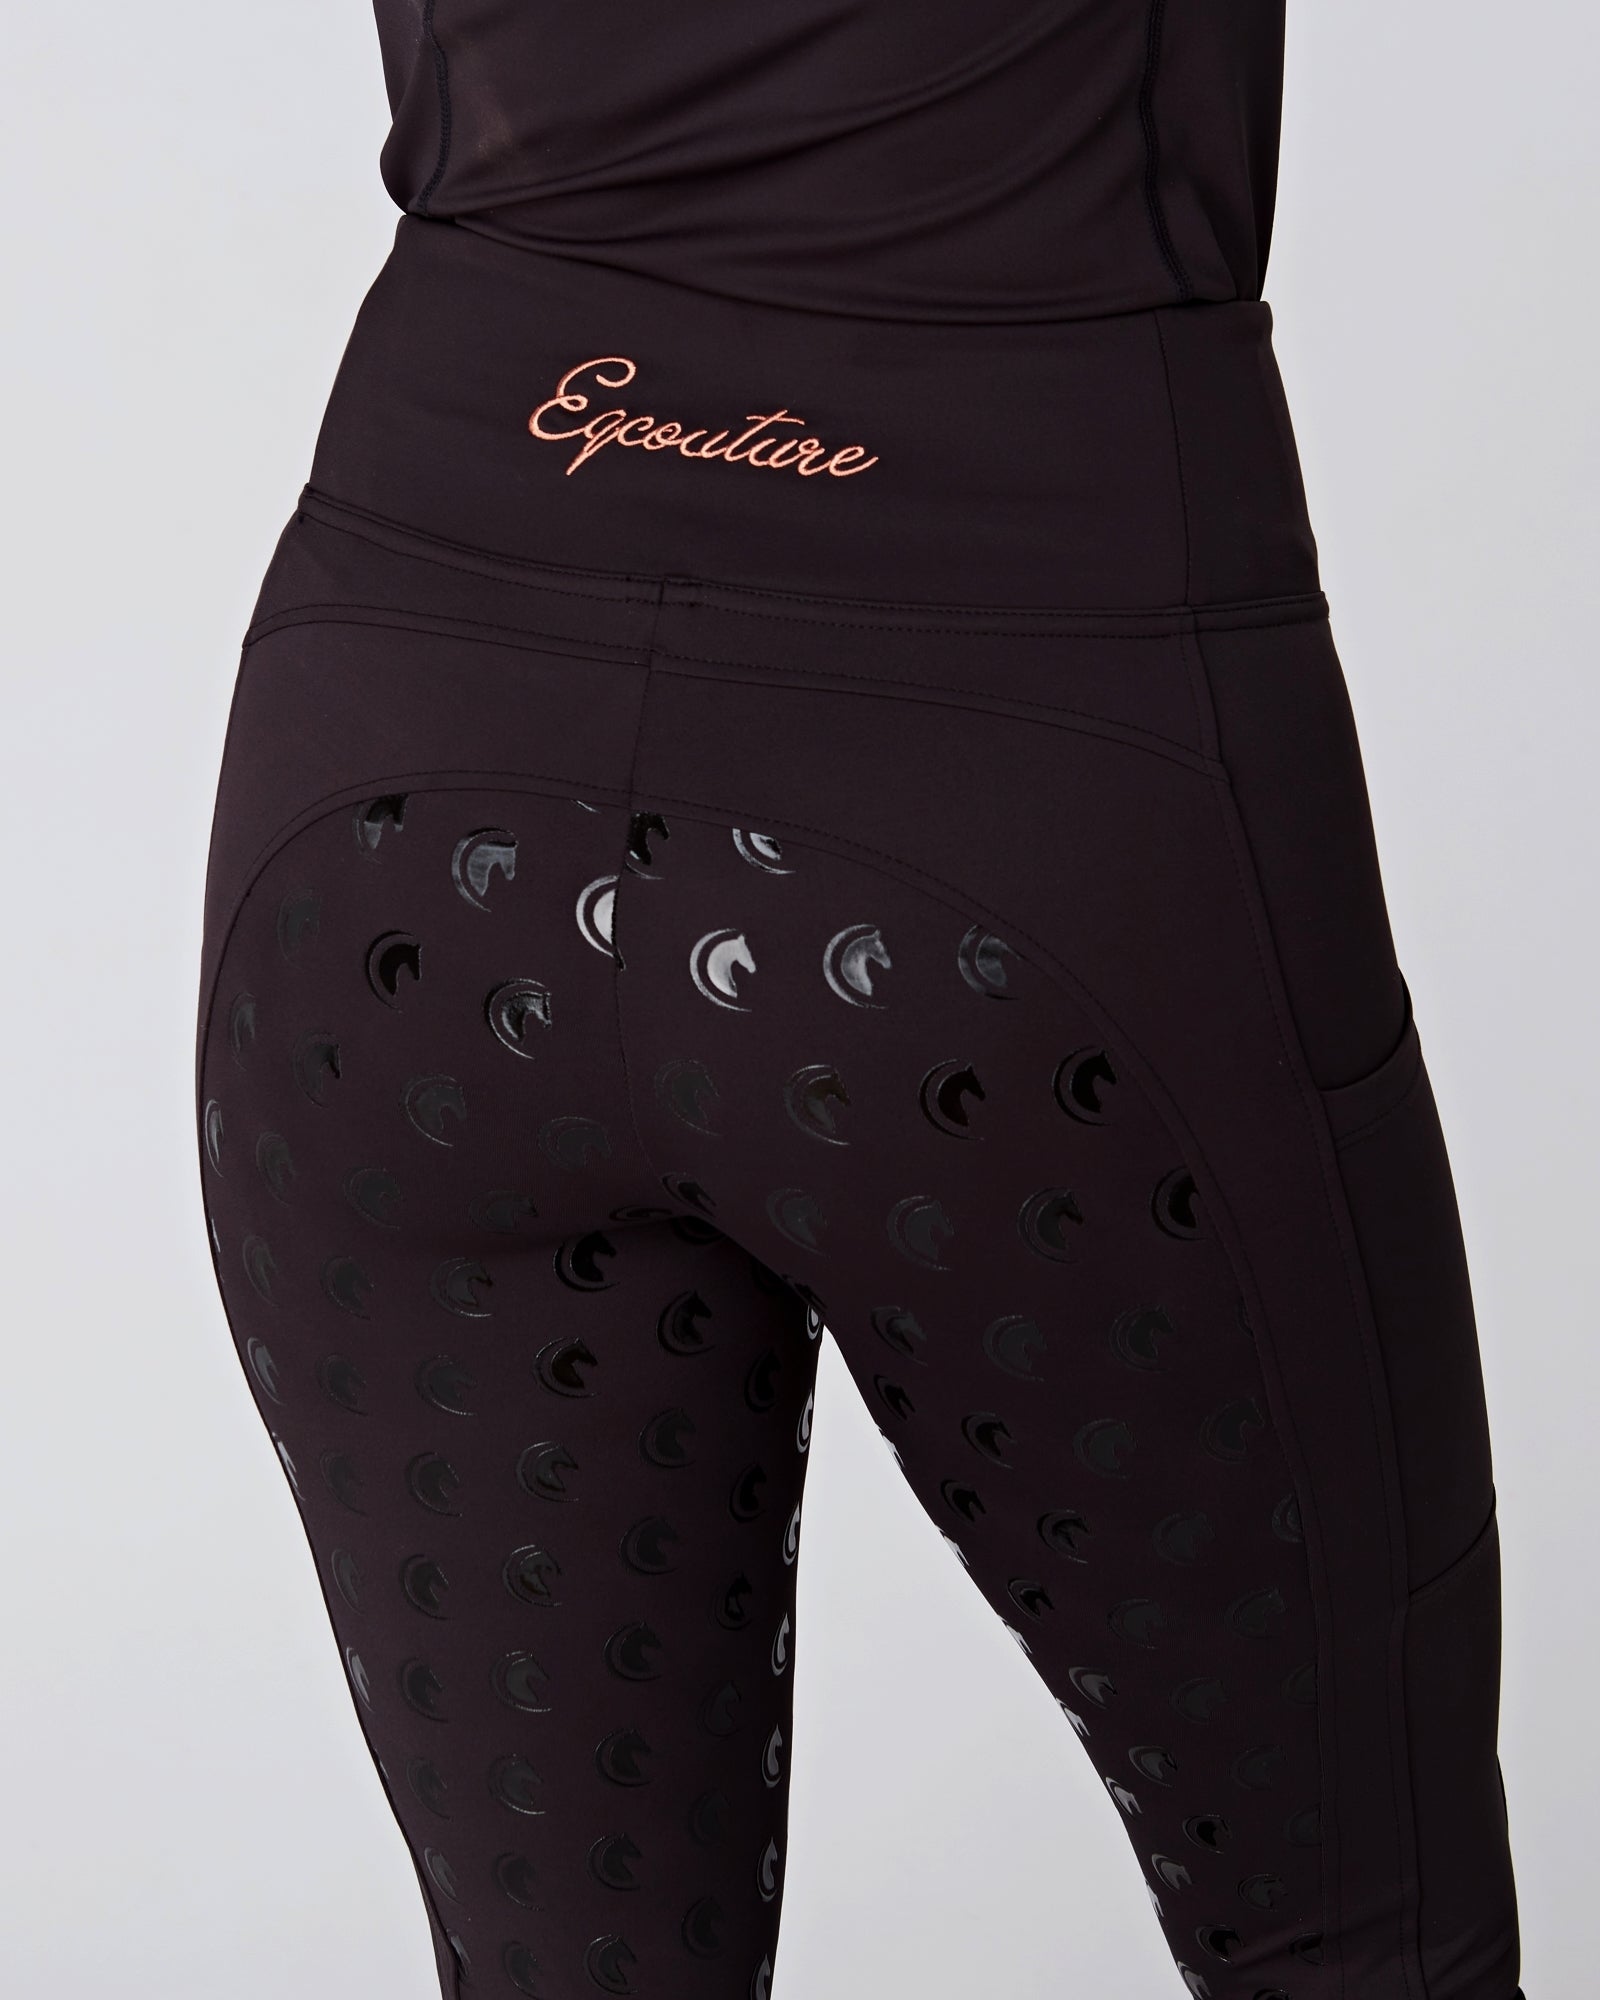 Horse Riding Leggings / Tights / Breeches with pockets - BLACK